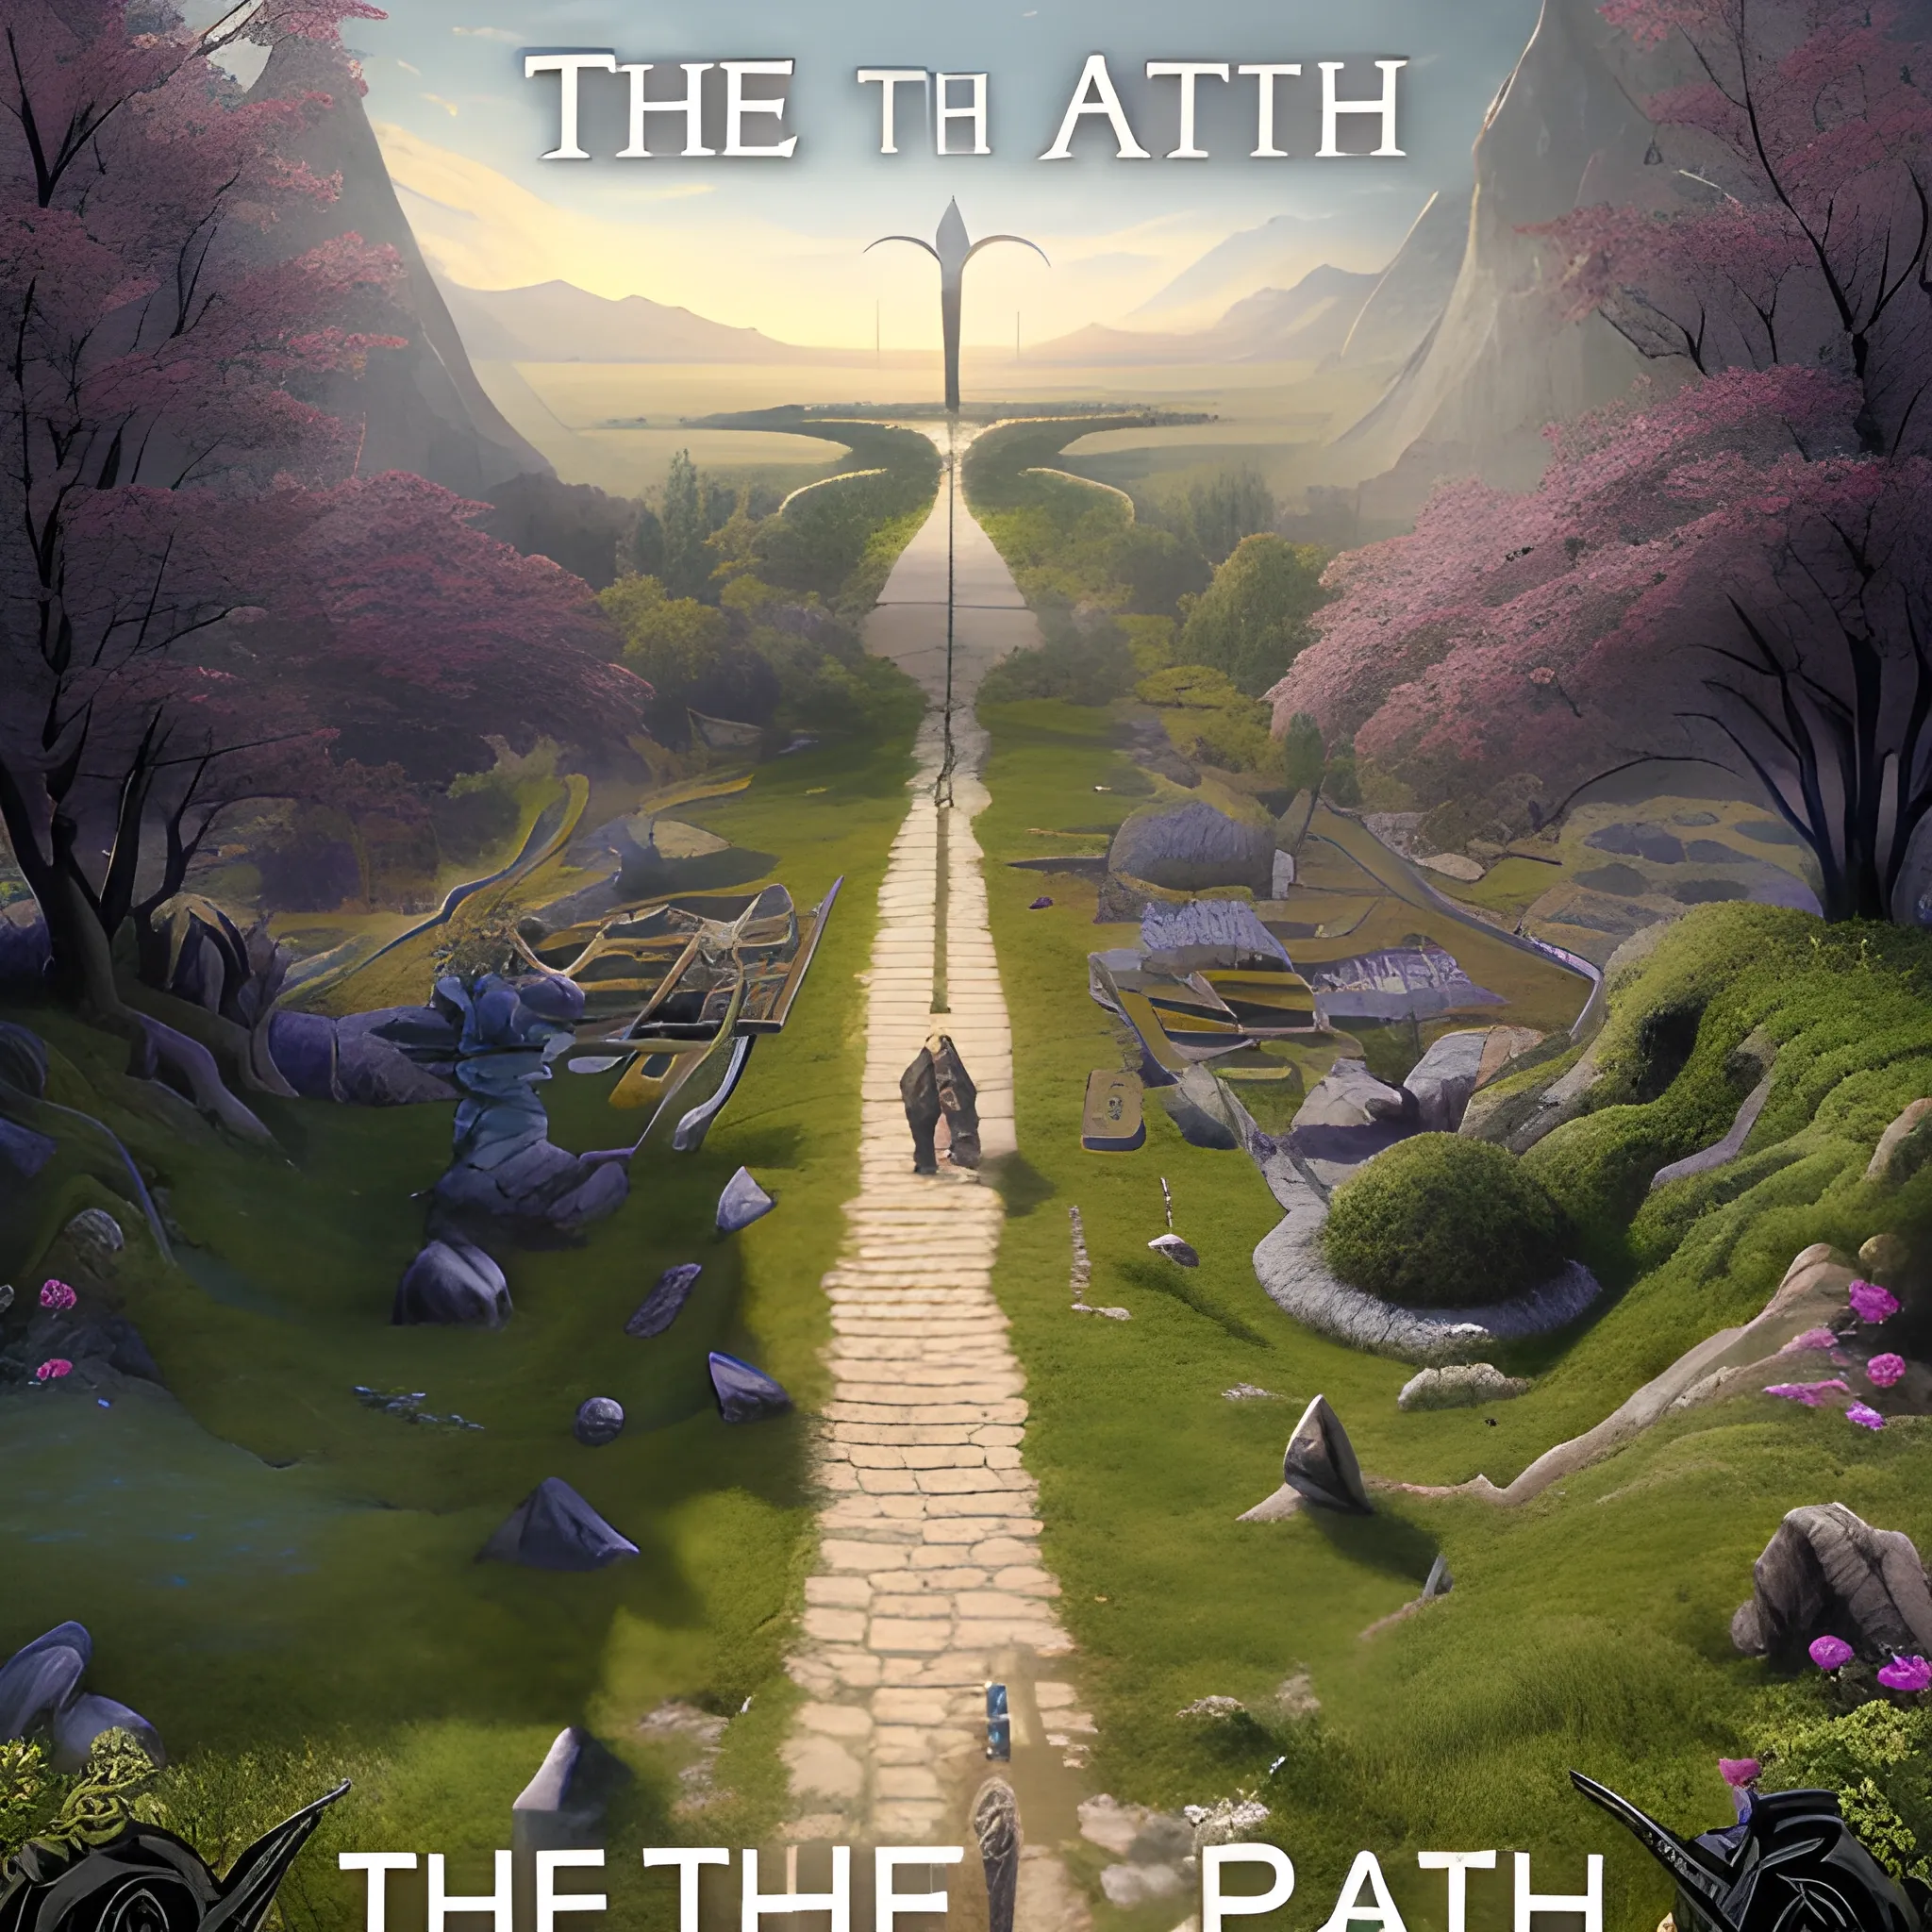 The Path of the Initiate